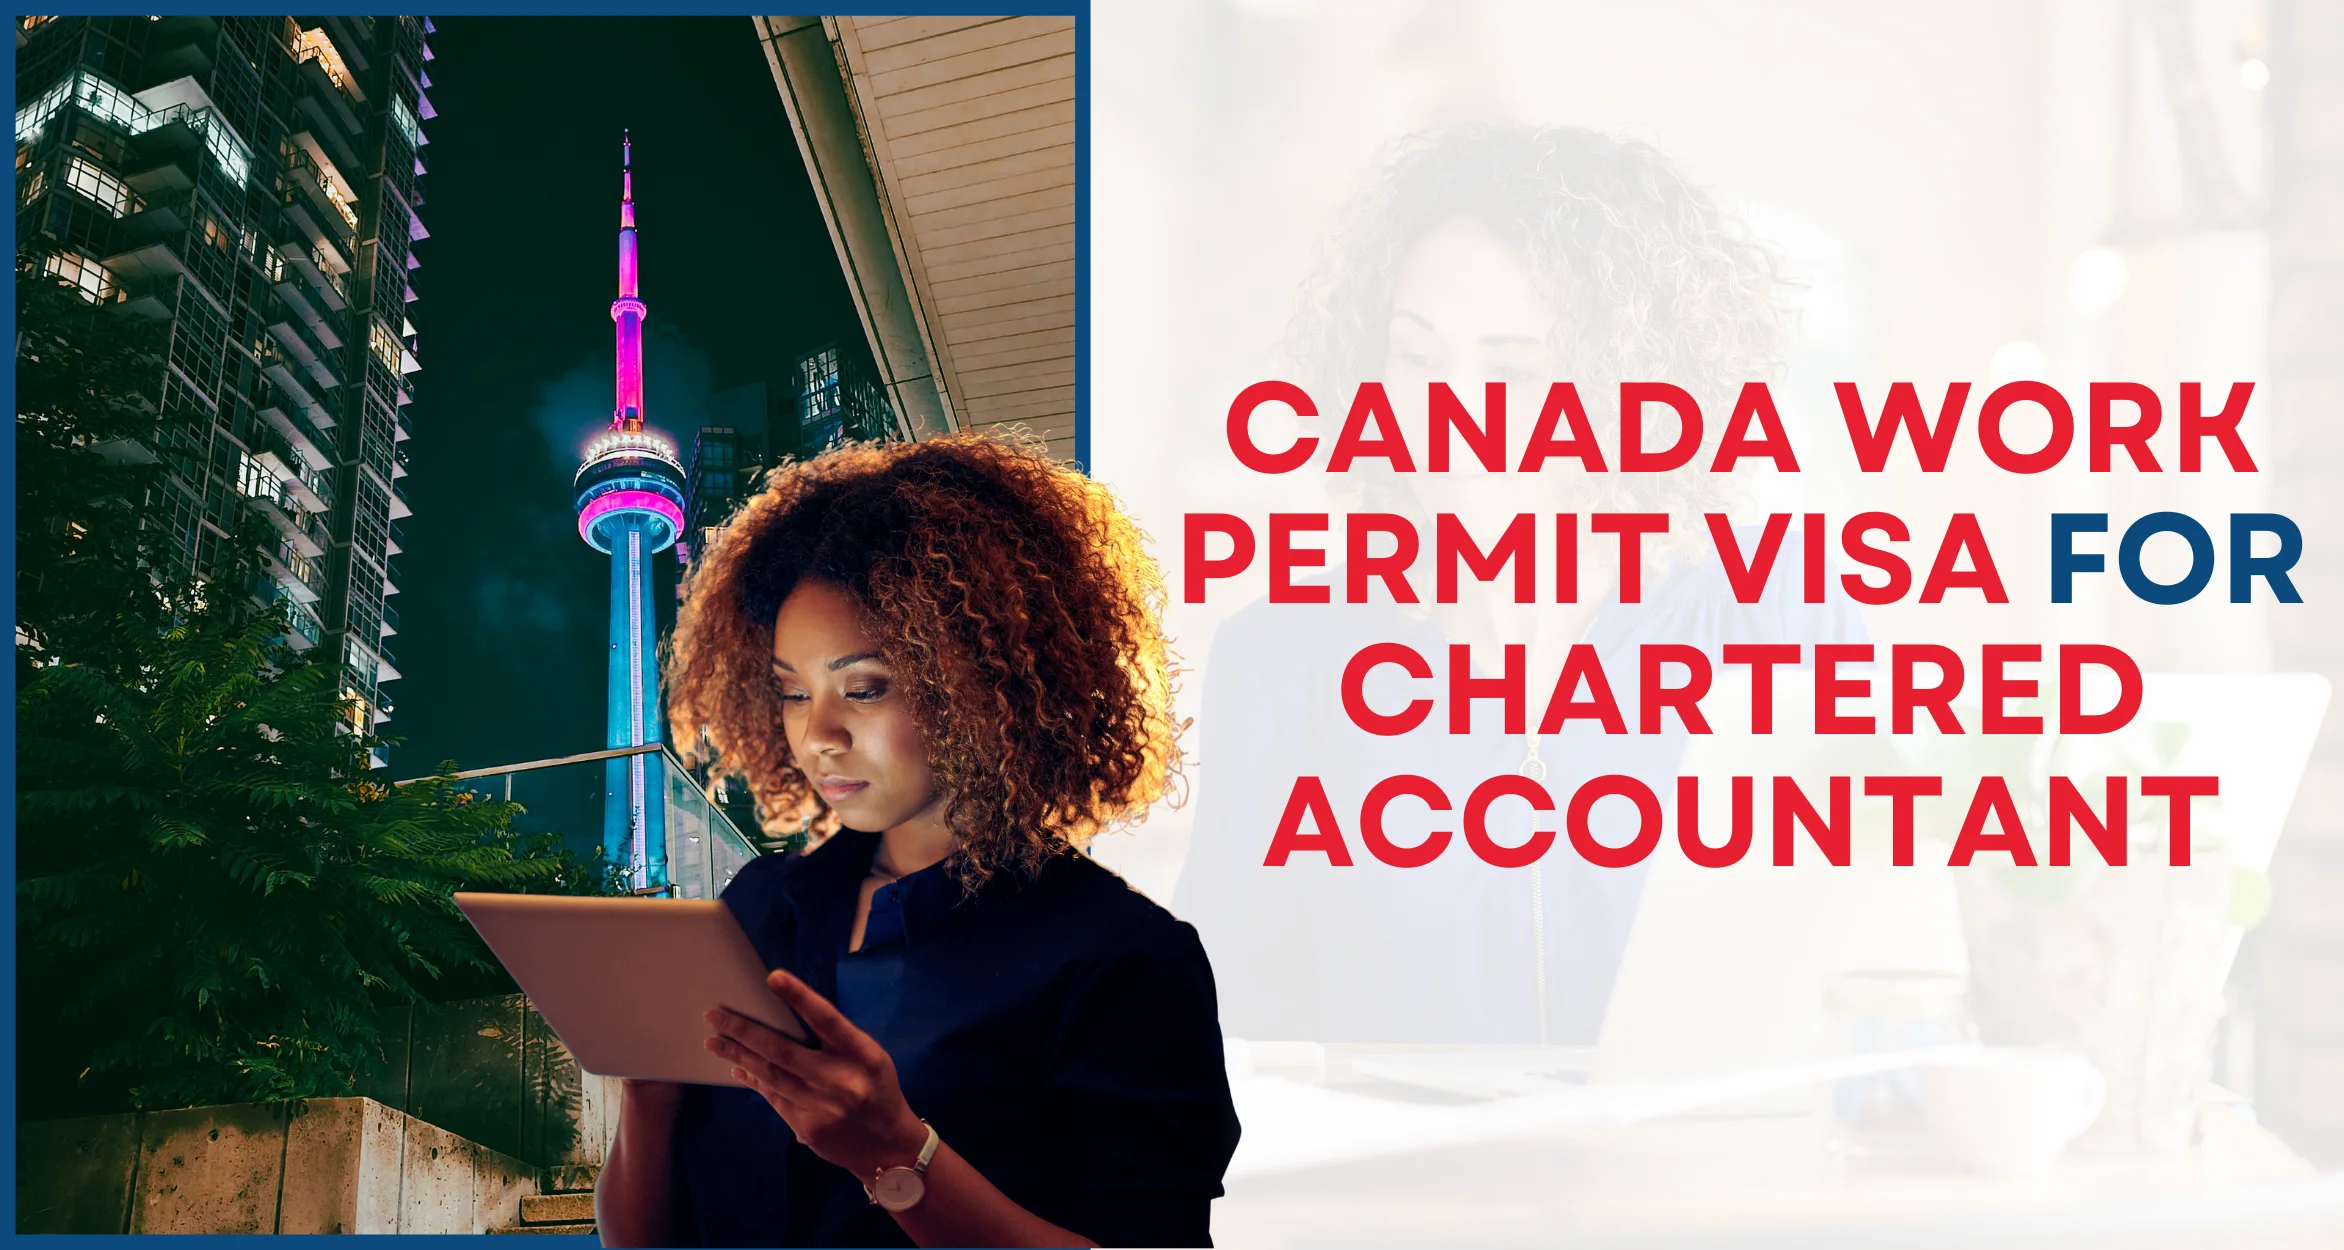 Canada Work Permit visa for chartered accountant